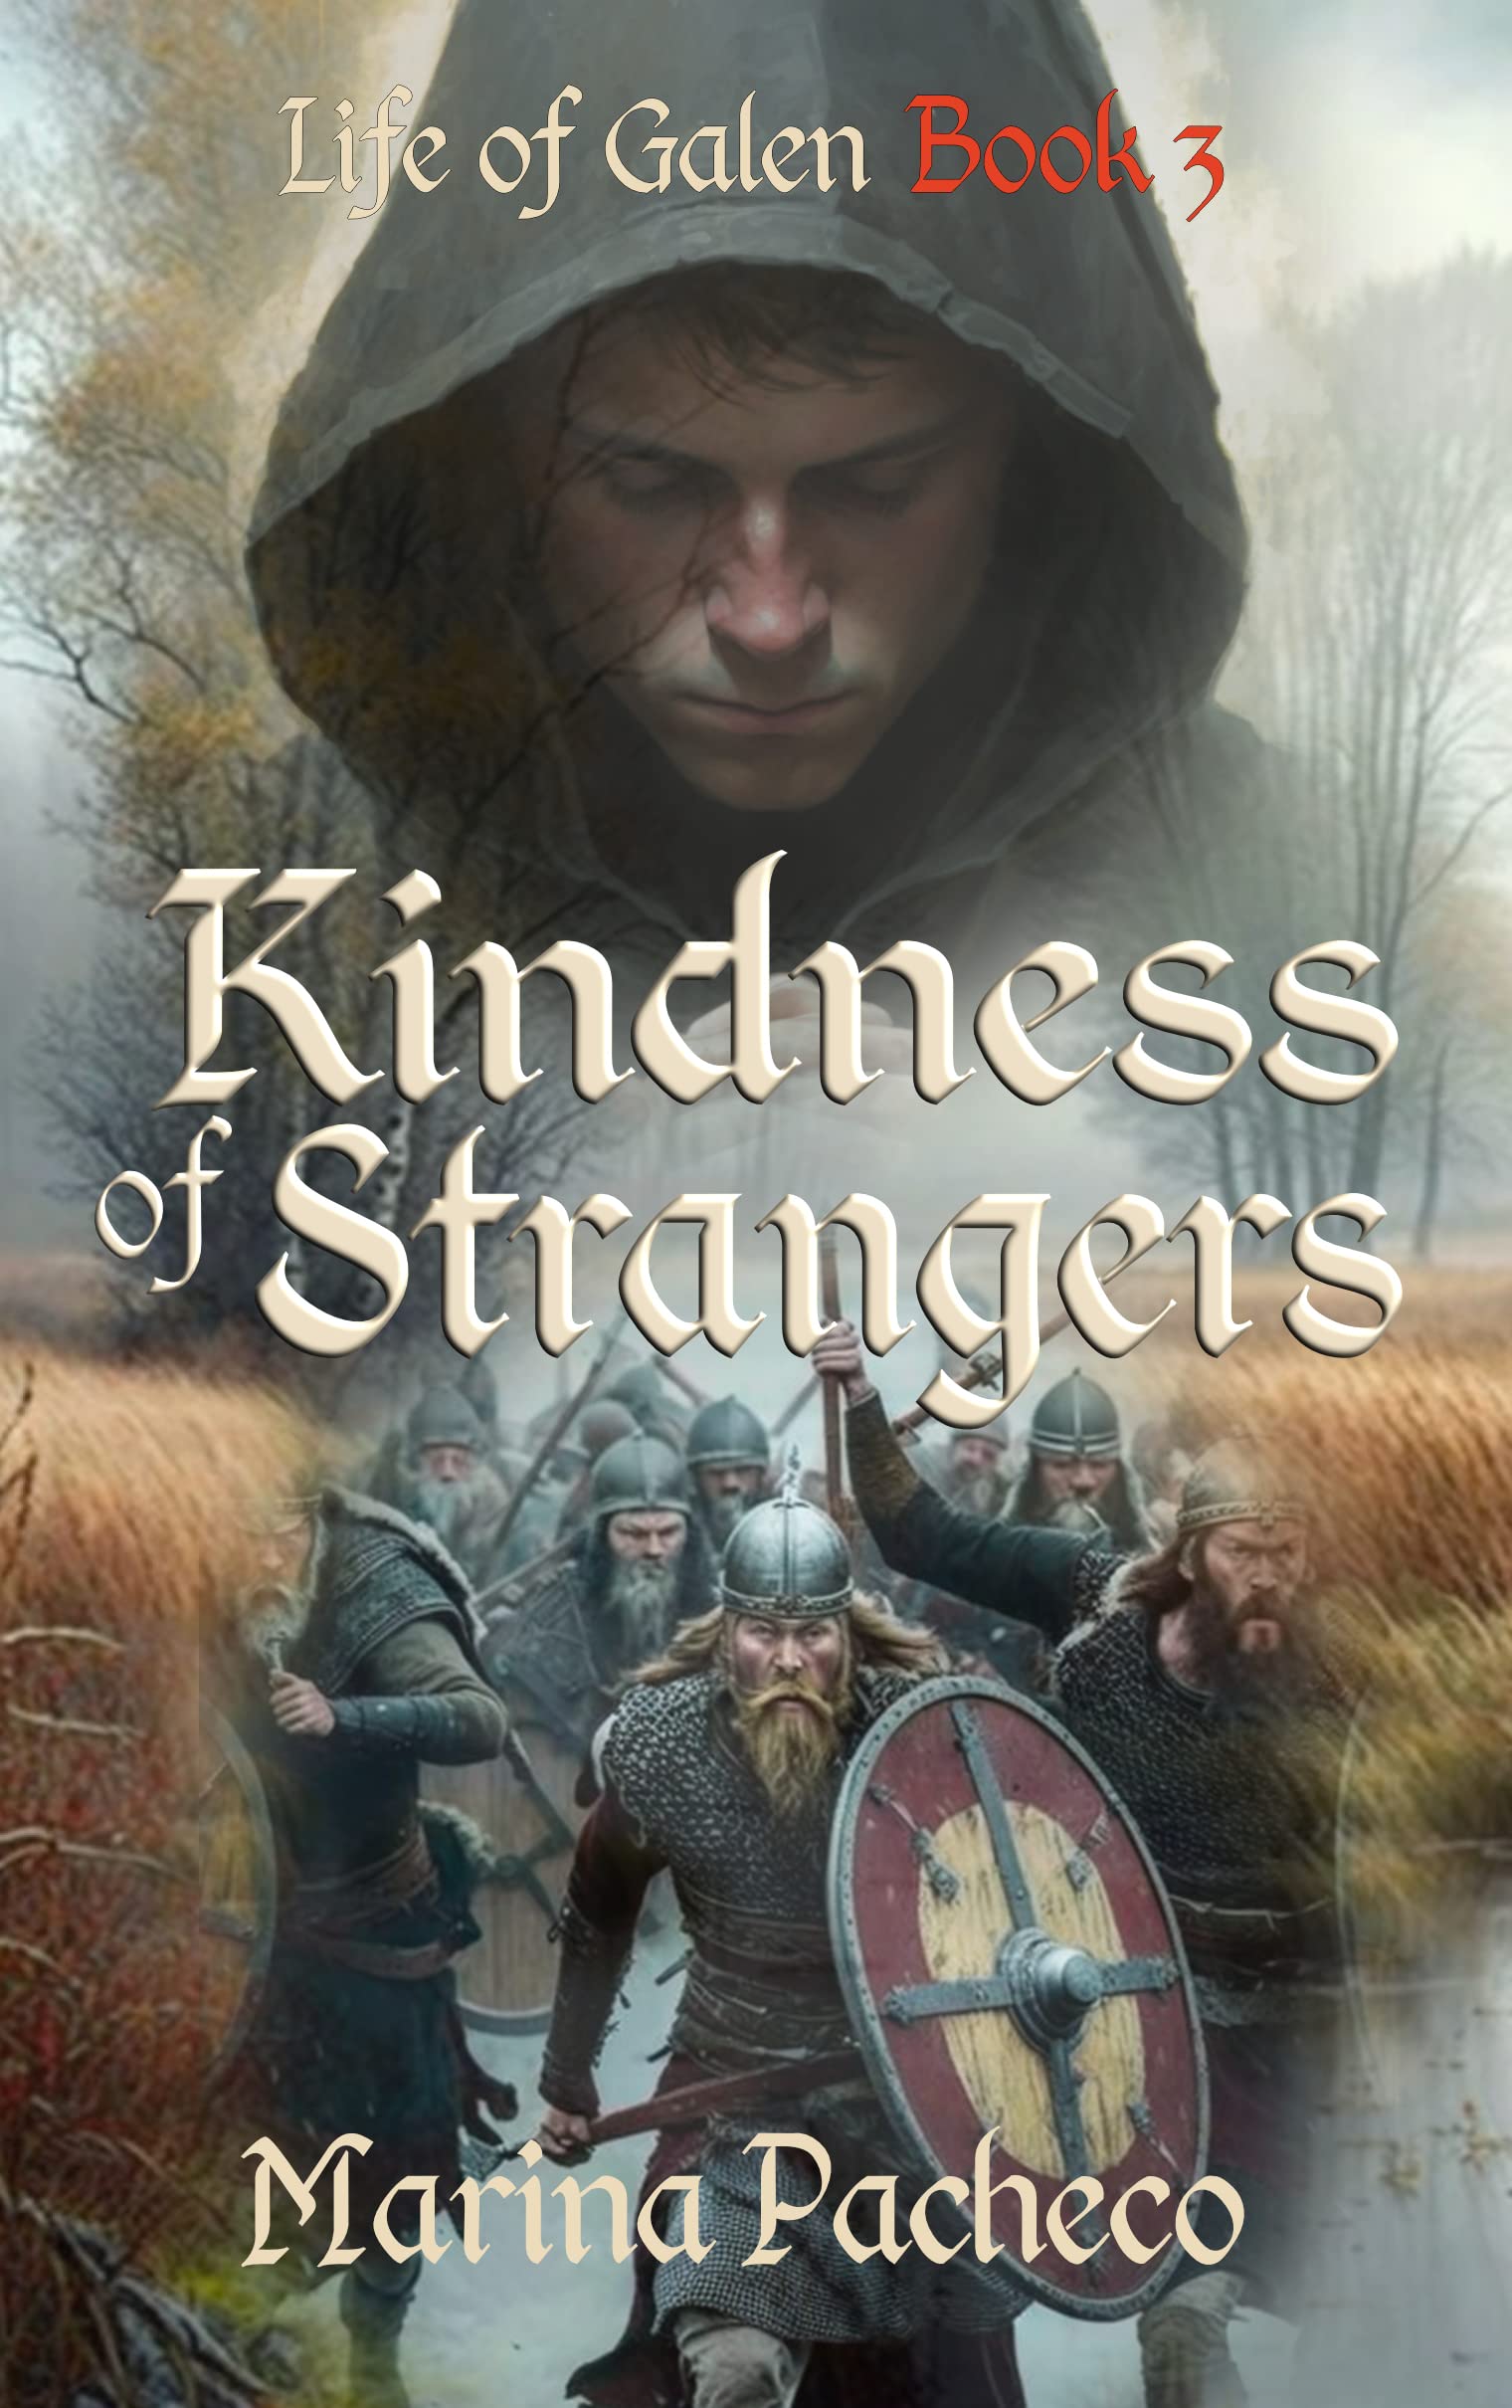 Kindness of Strangers: A novel about miracles, friendship, and acceptance during a time of war (Life of Galen Book 3)